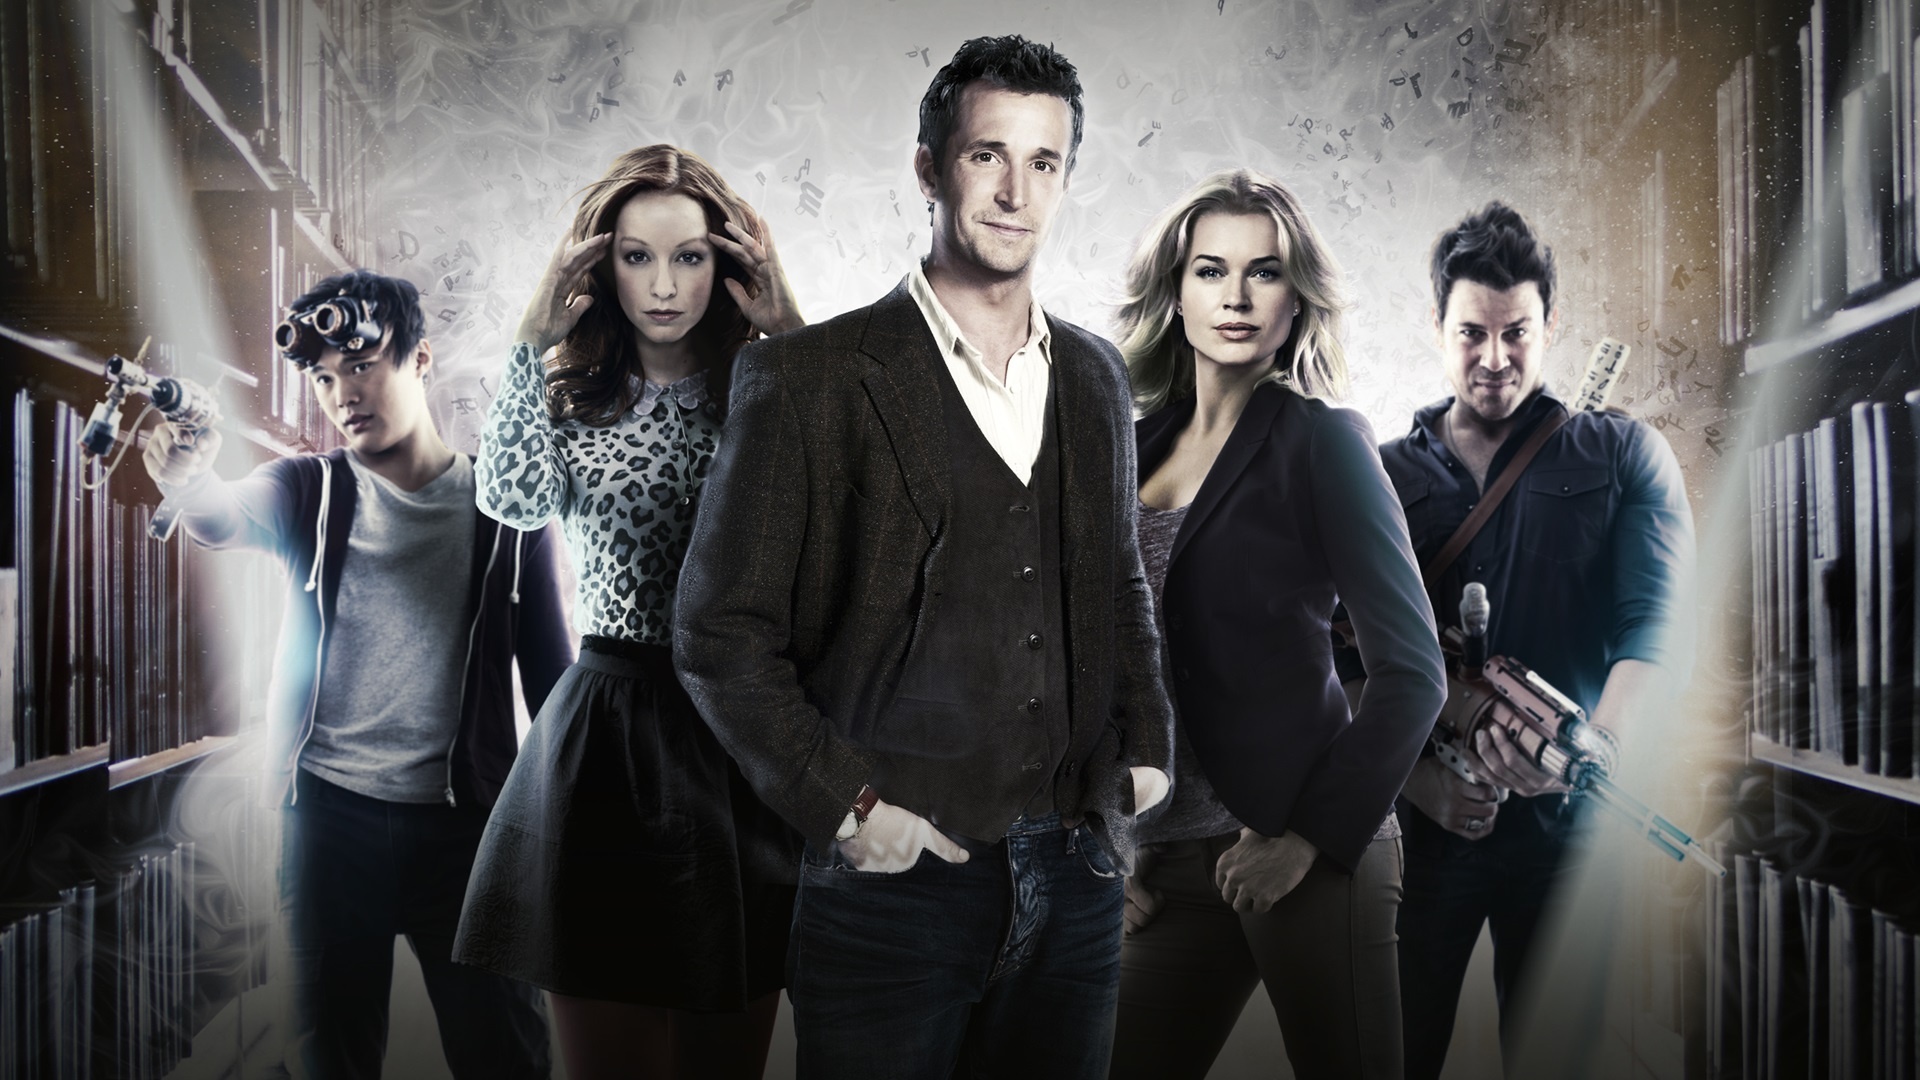 Noah Wyle: 10+ The Librarians HD Wallpapers and Backgrounds. 1920x1080 Full HD Background.